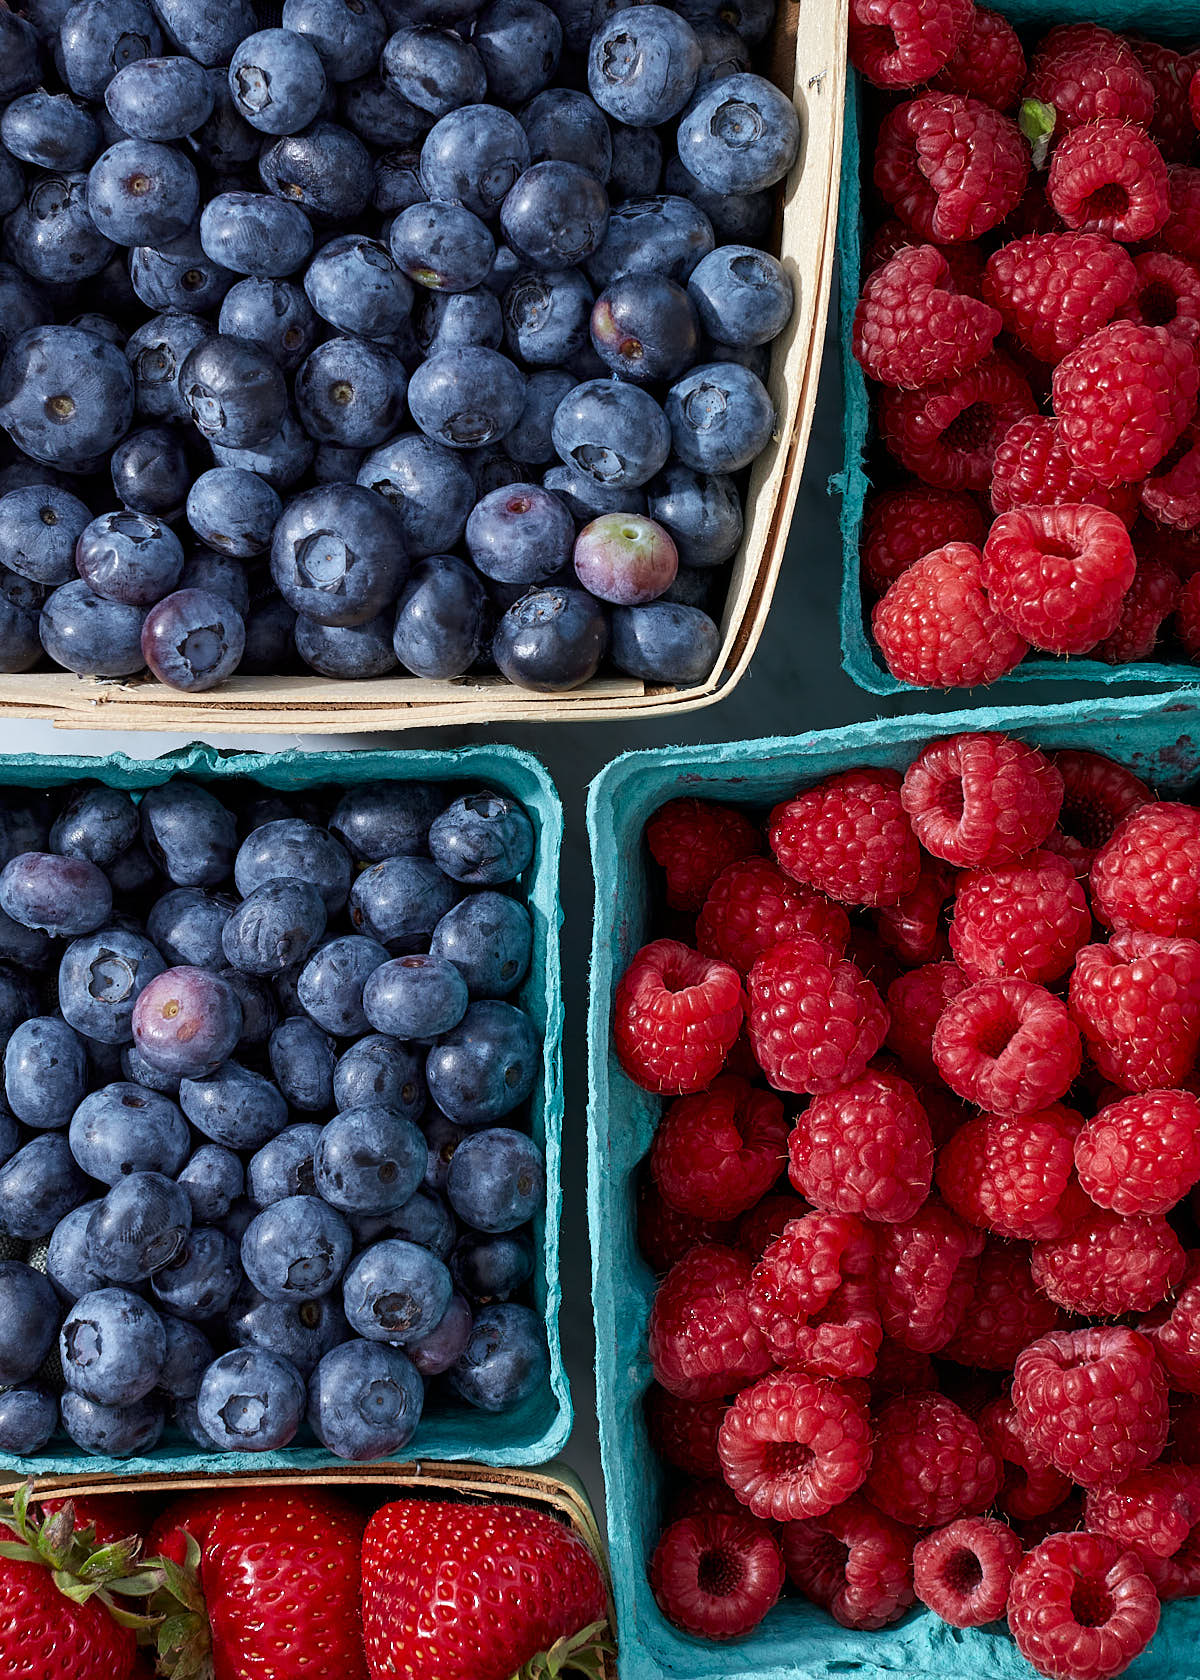 A close up of fresh blueberries, raspberries, and strawberries from the farmers market.